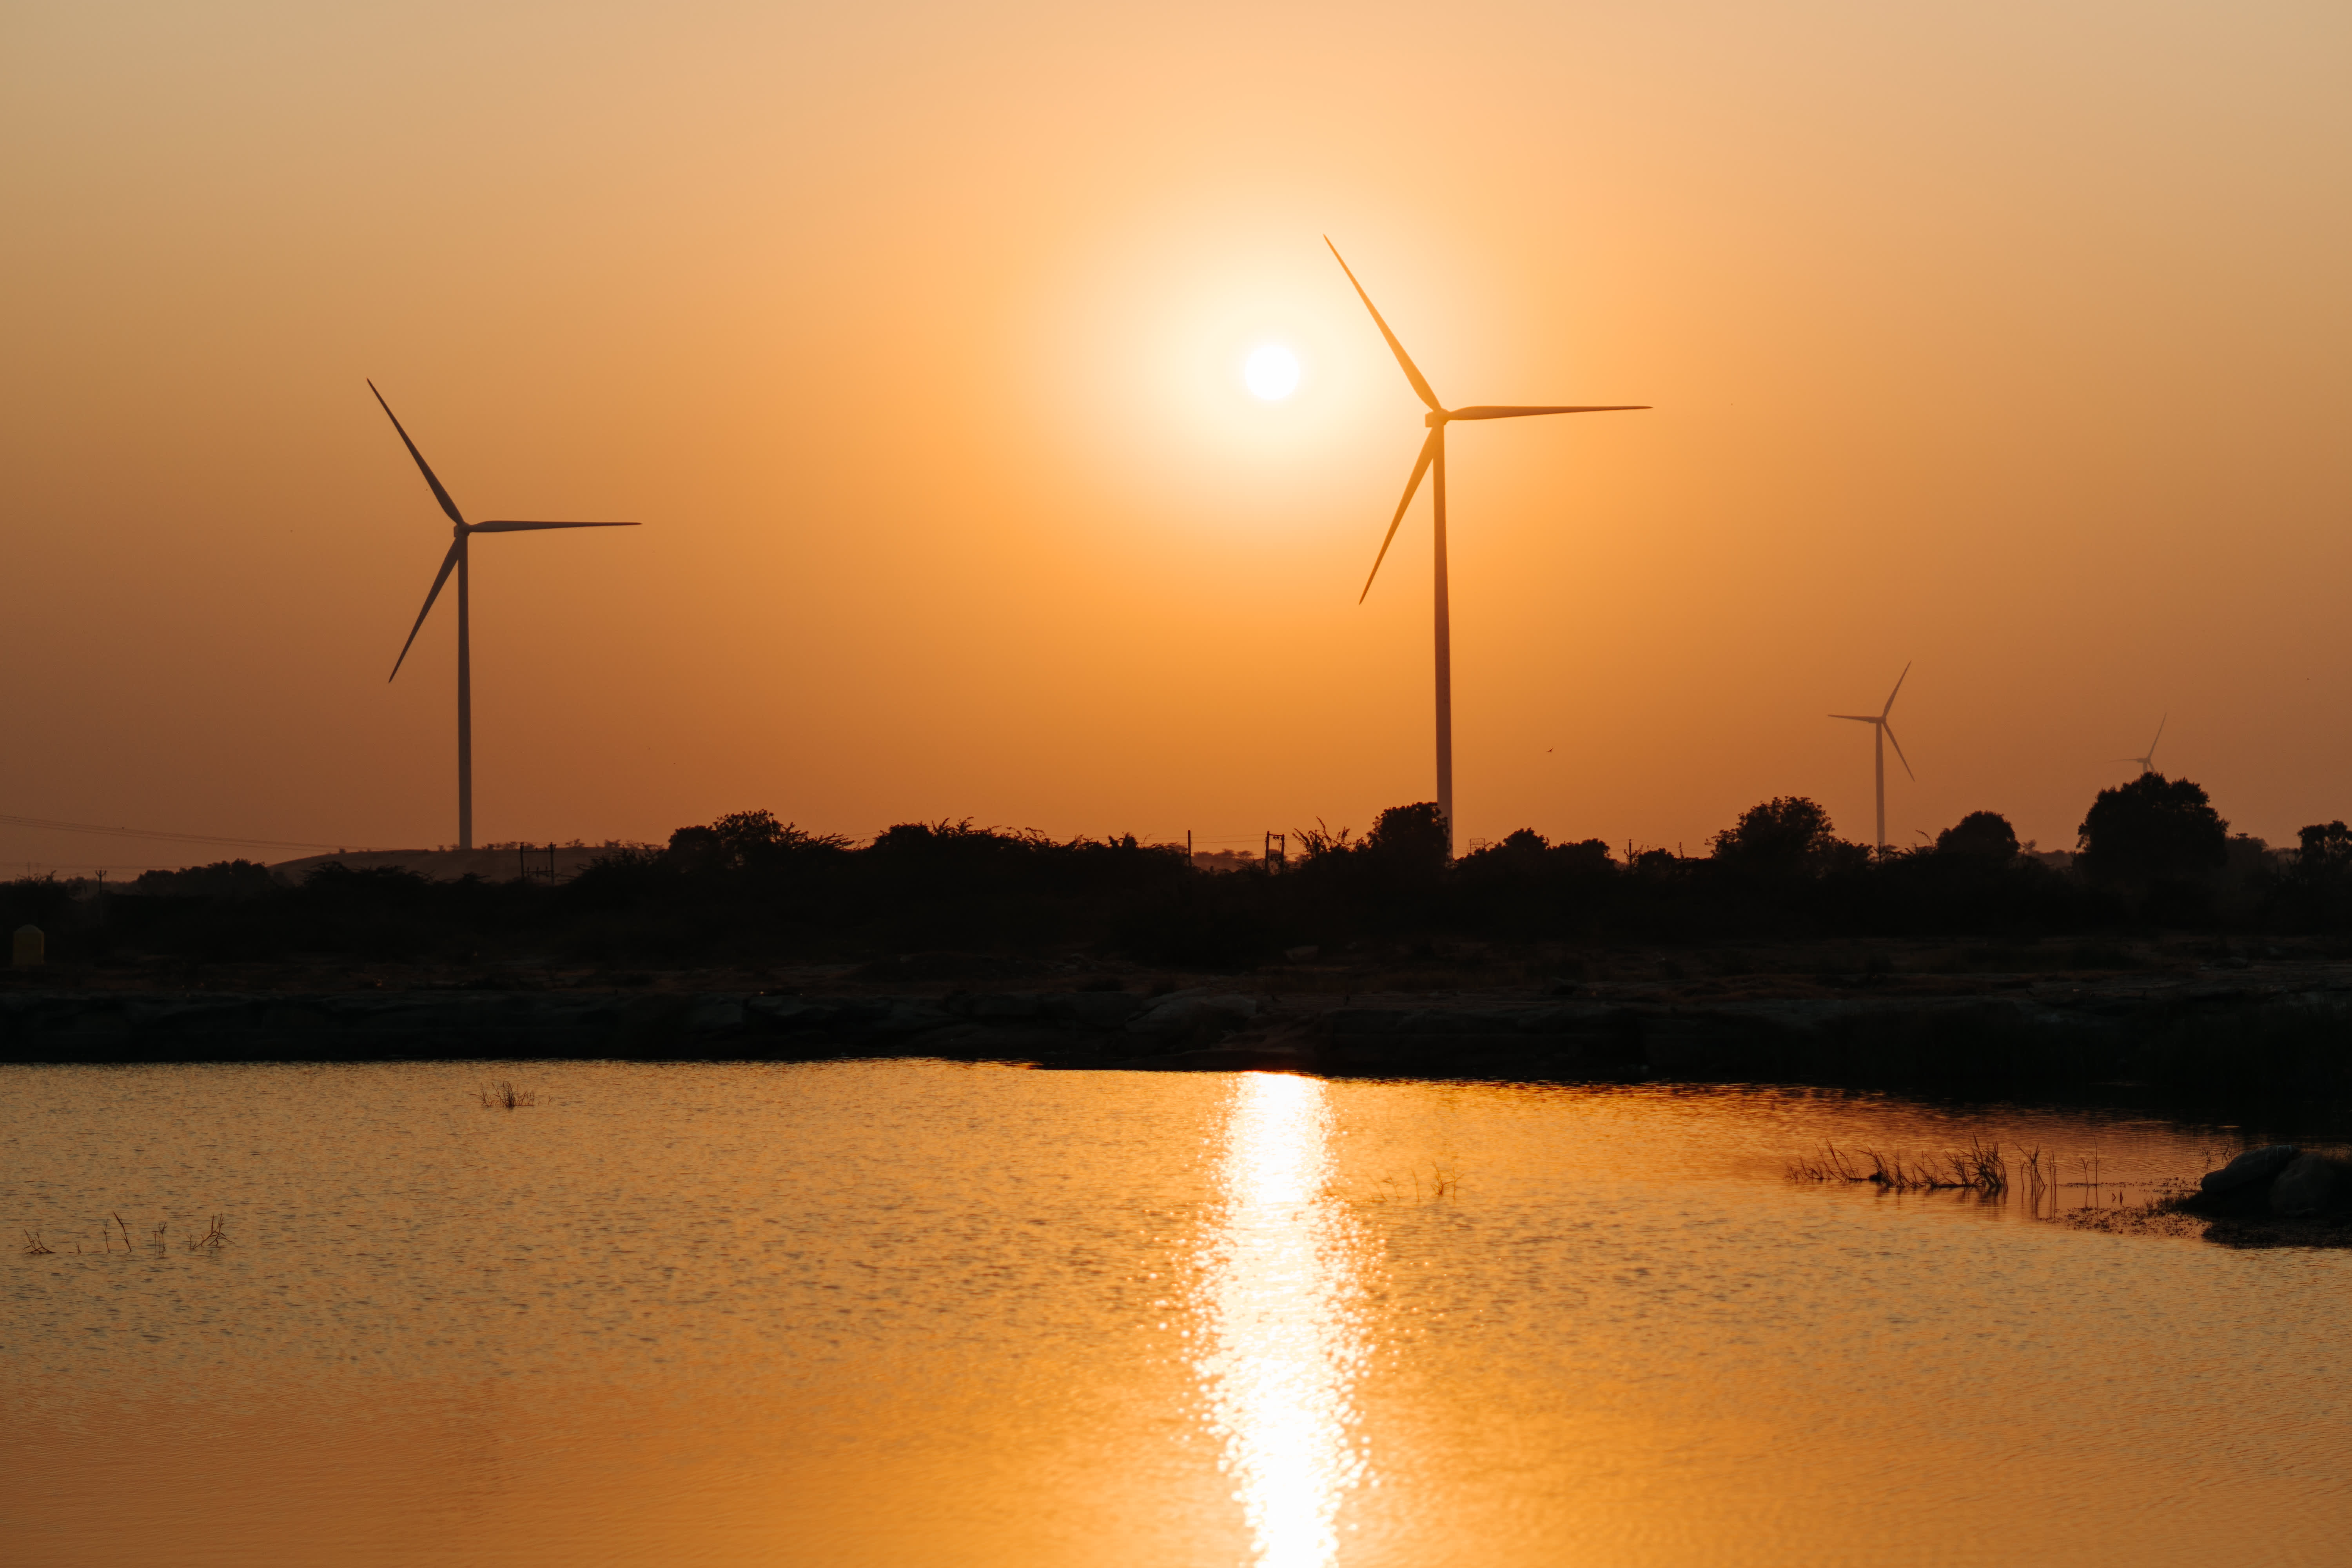 Power giants to scope offshore wind projects in India's untapped market